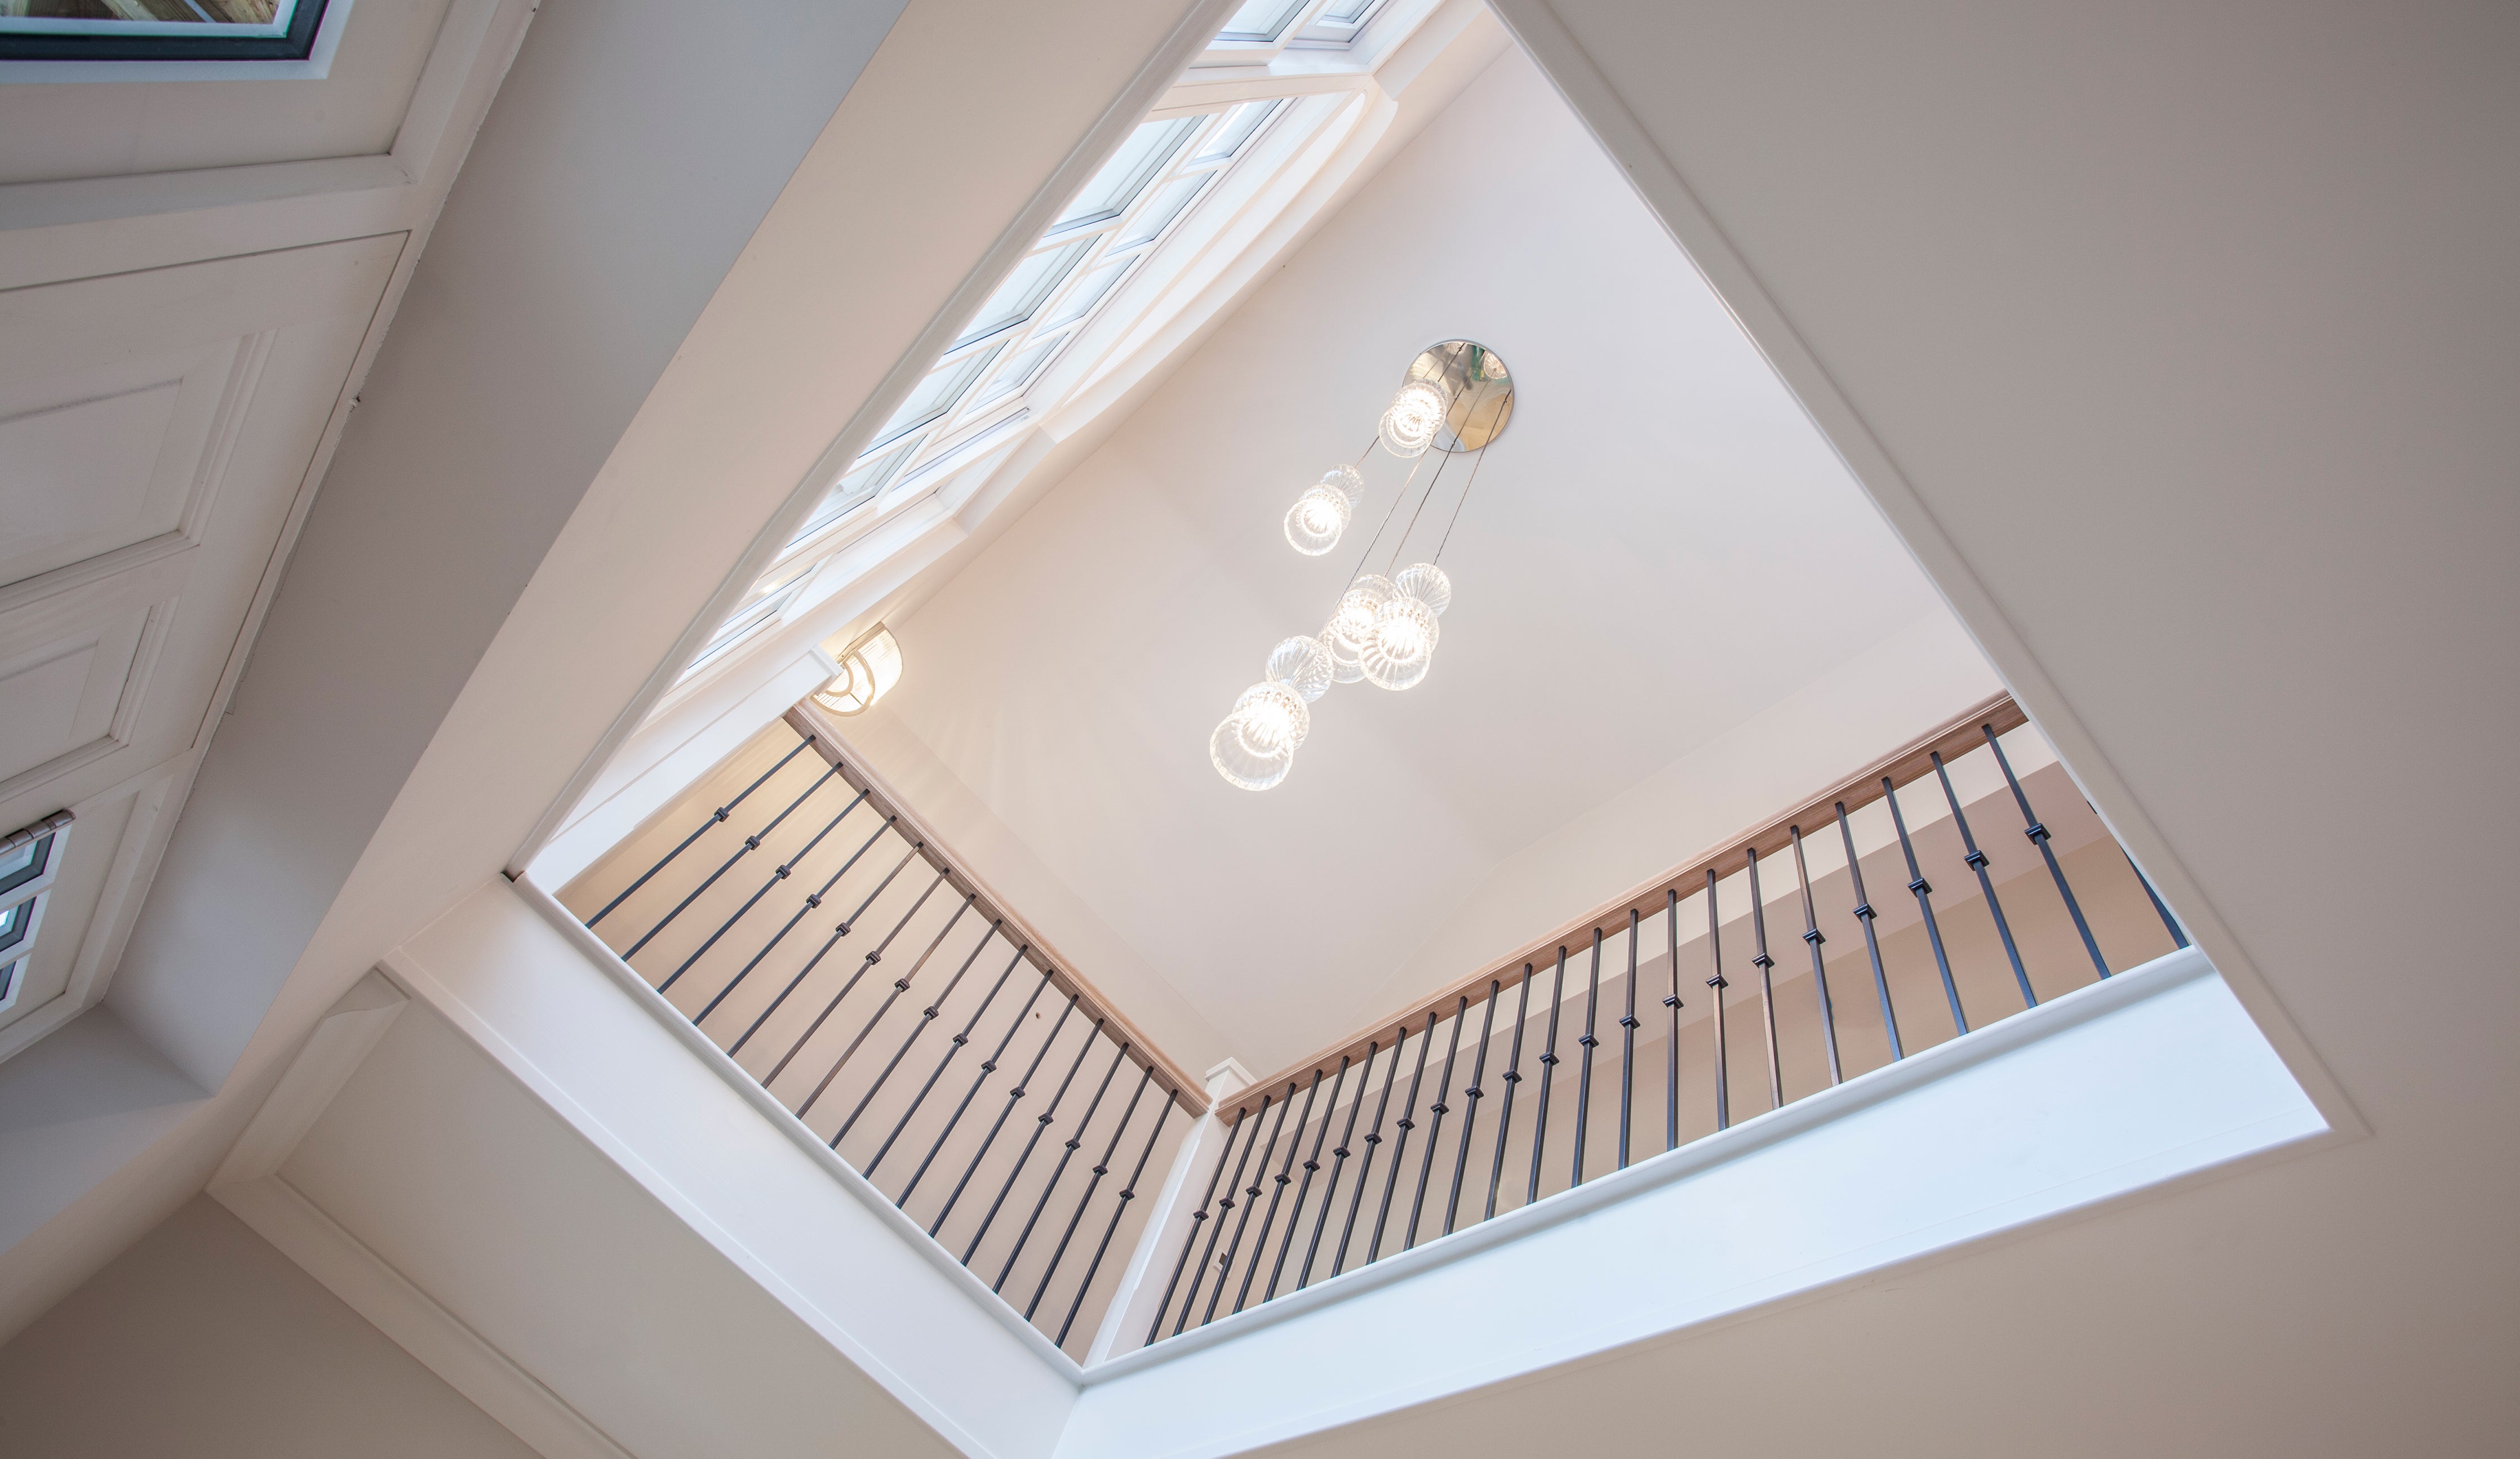 Spindle Pendant glass lights by Rothschild &amp; Bickers cascading through stairwell, interiors by Katie Elizabeth Design